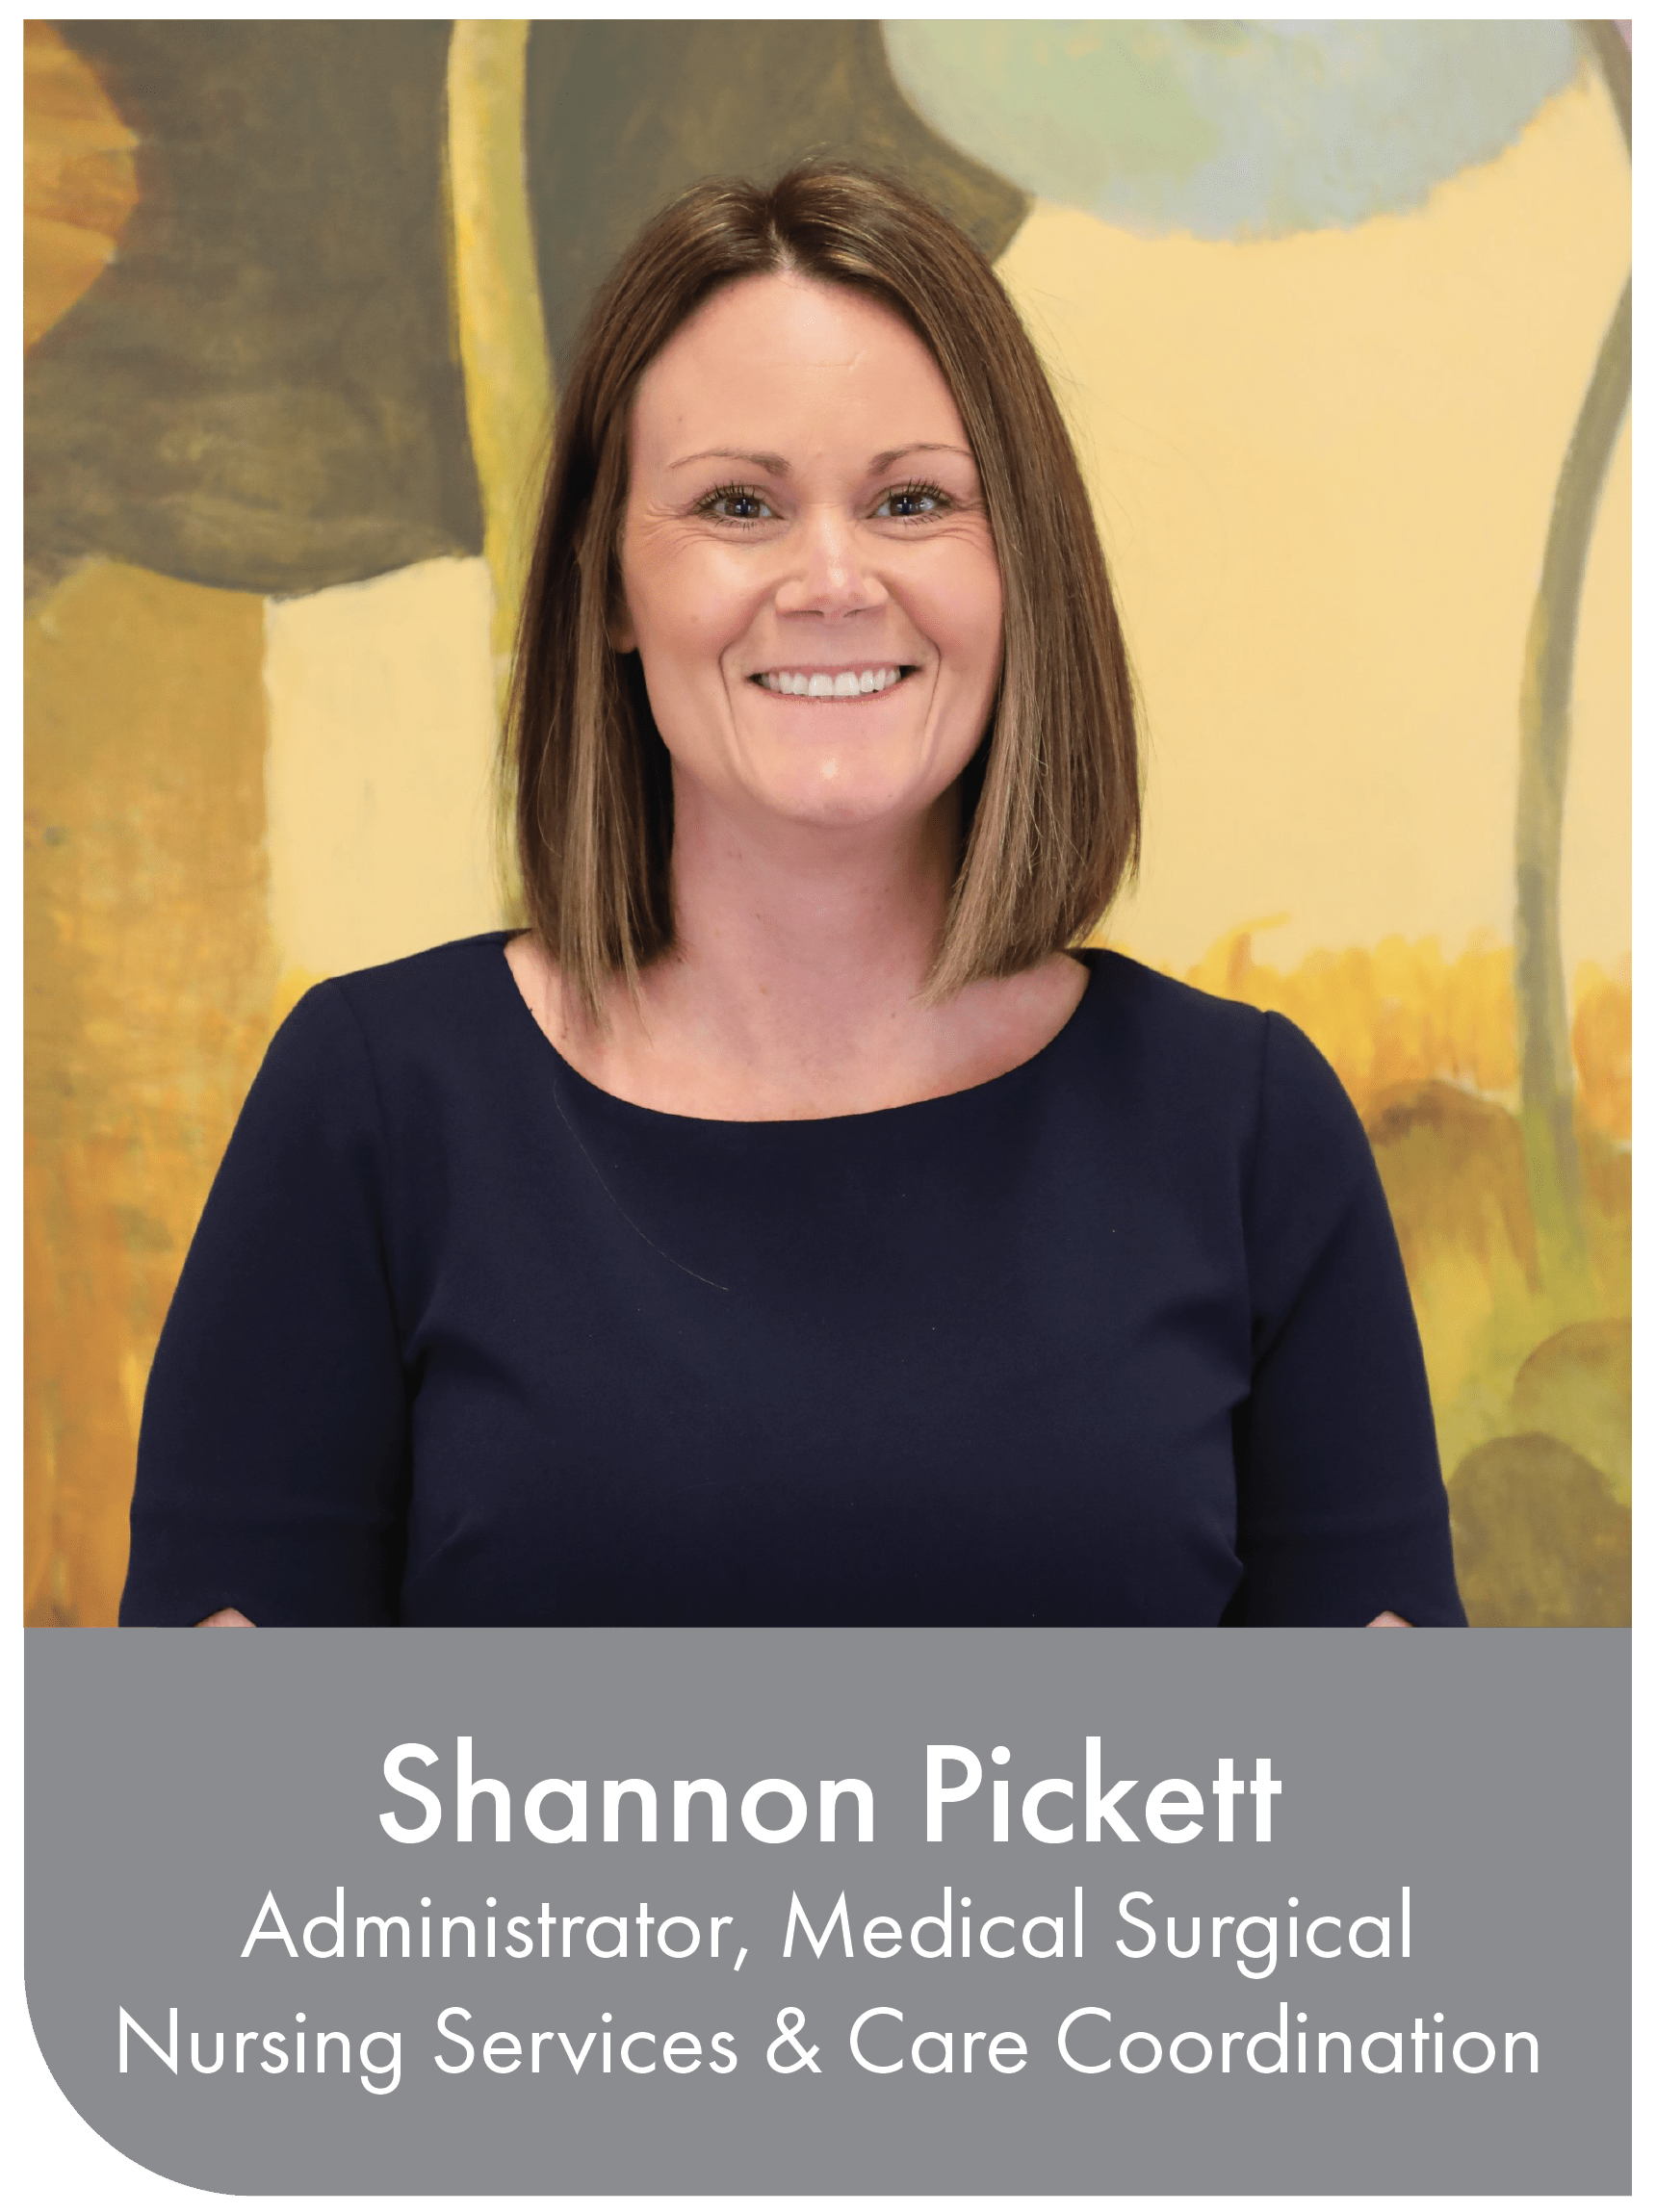 Shannon Pickett, Administrator, Medical Surgical Nursing & Care Coordination 